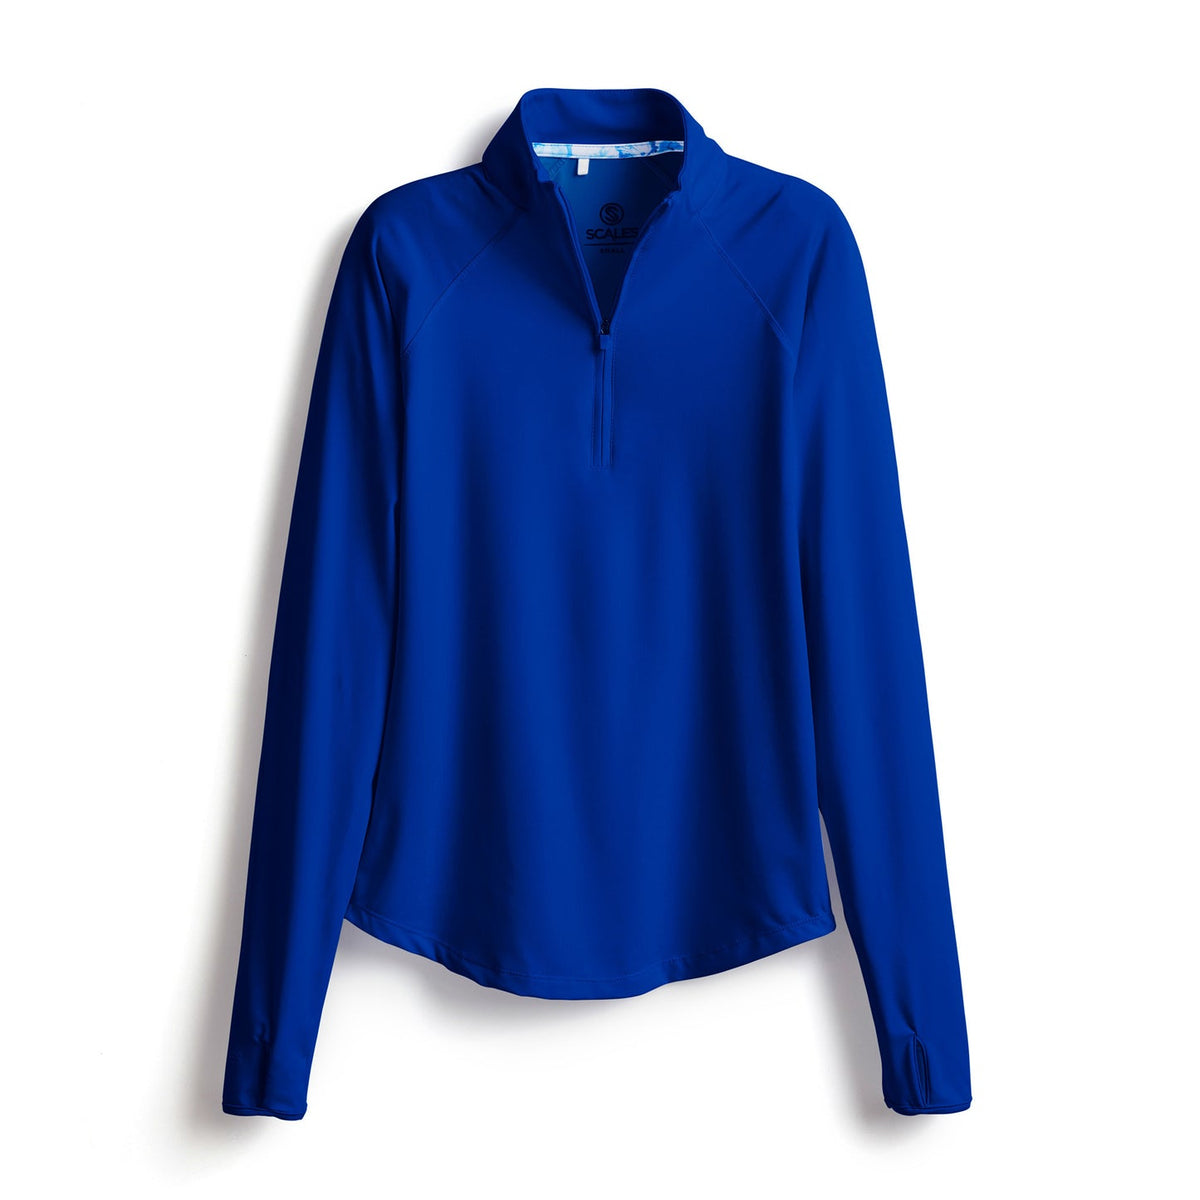 SCALES Offshore Core Womens Long Sleeve Quarter-Zip